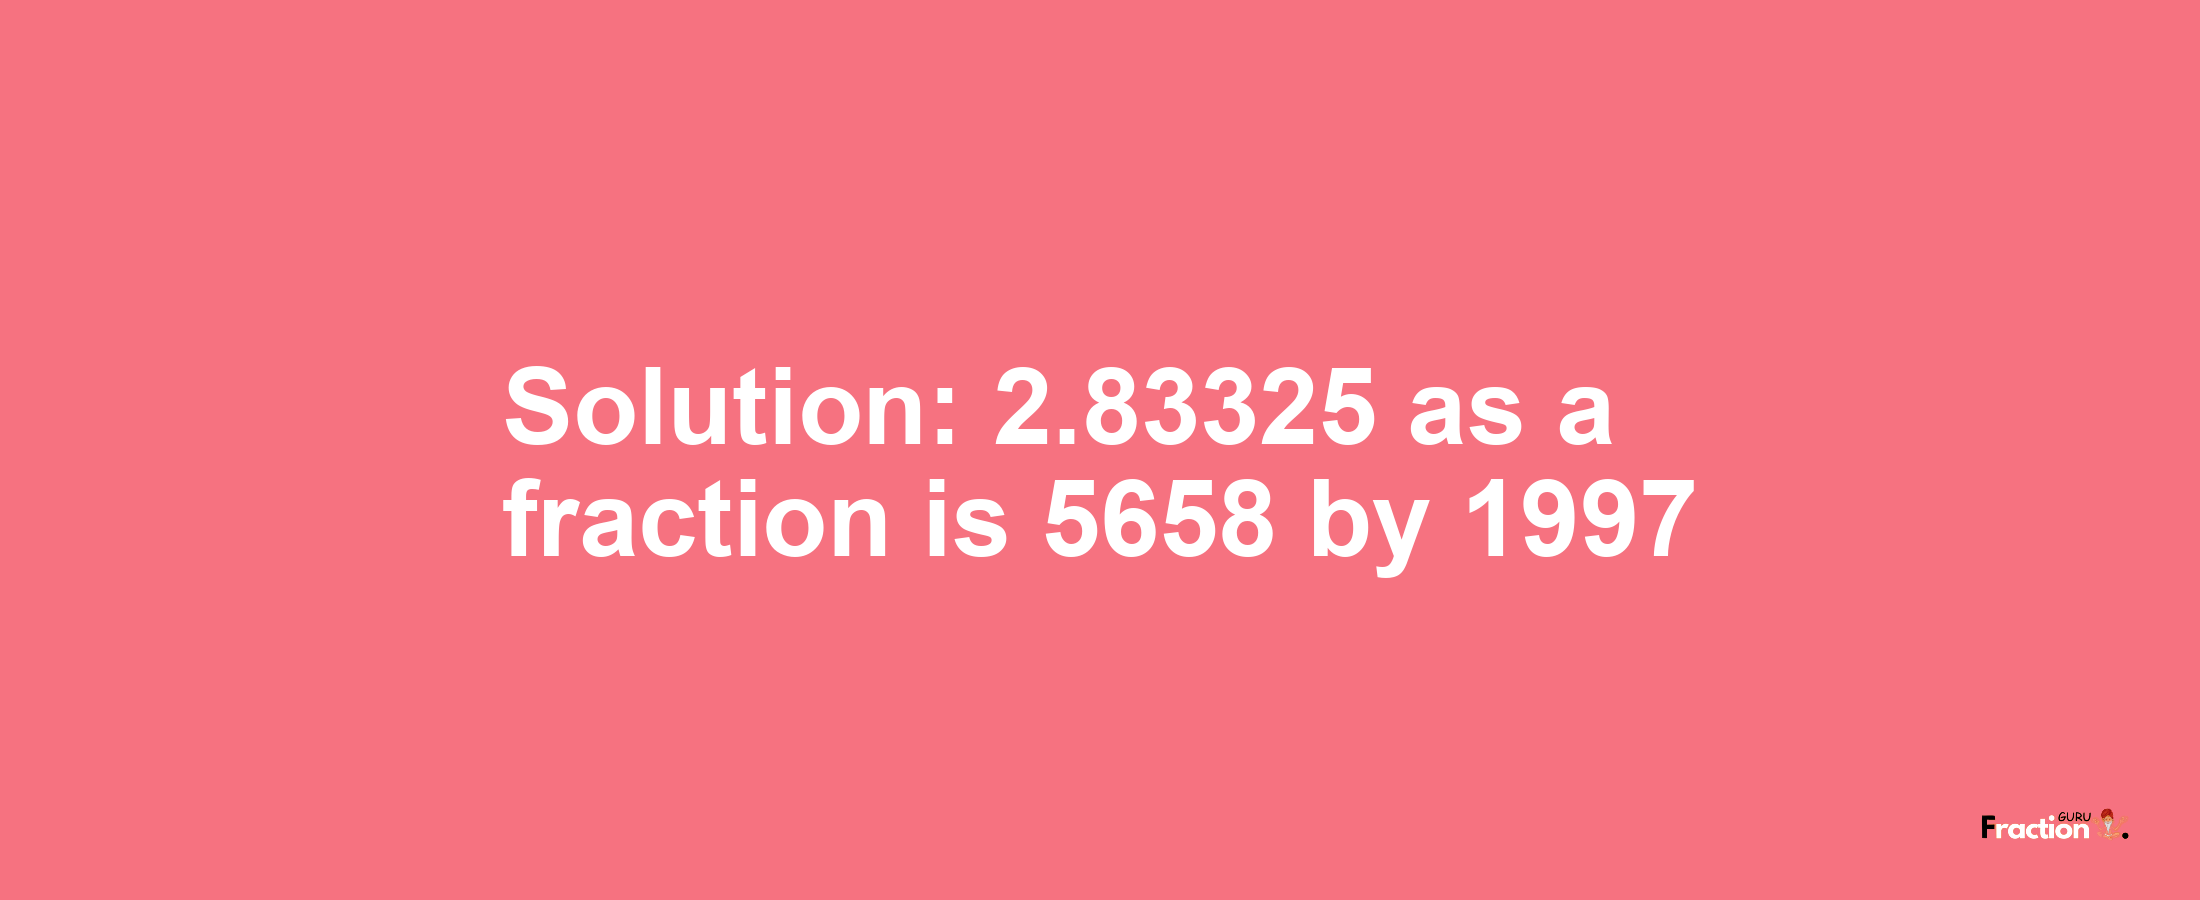 Solution:2.83325 as a fraction is 5658/1997